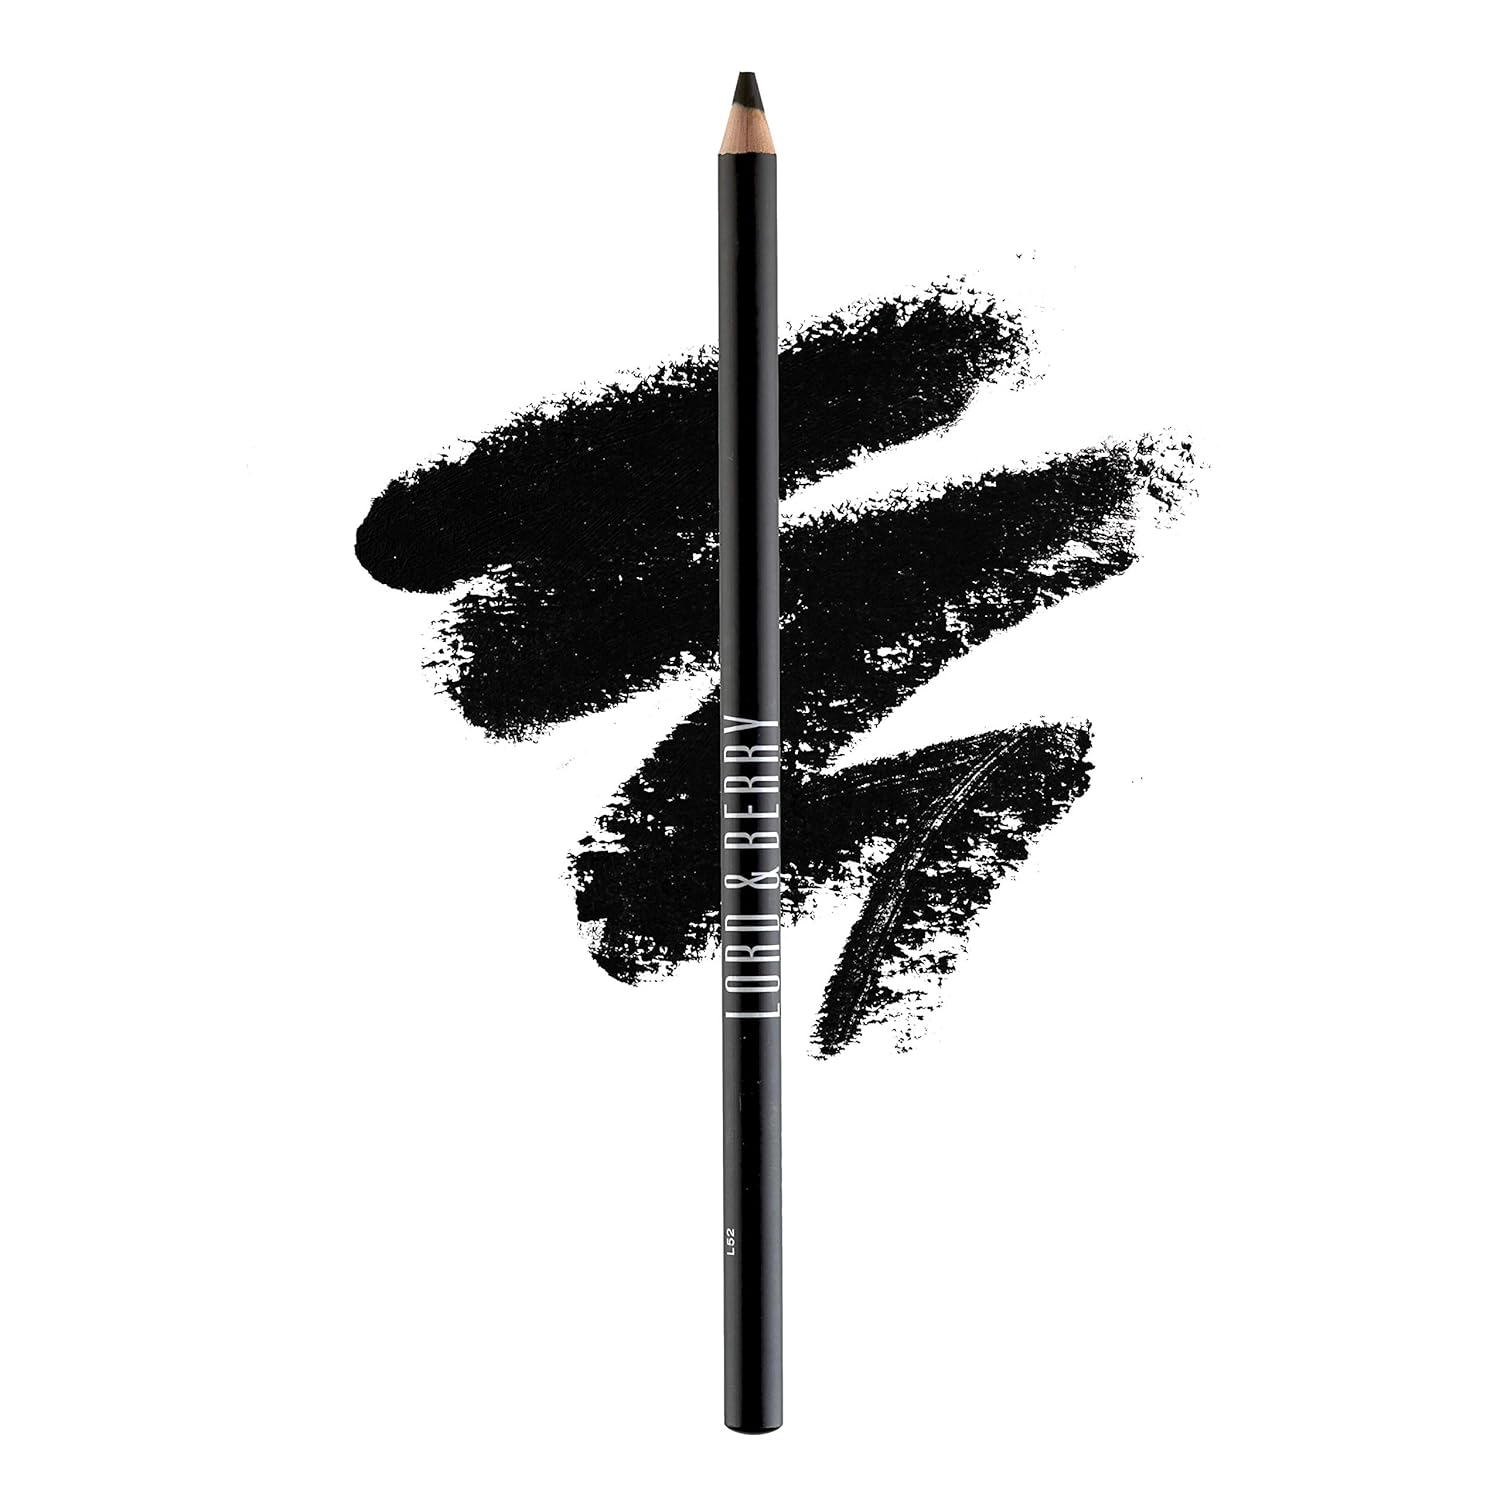 Lord & Berry COUTURE KOHL KAJAL Eyeliner Pencil, Long Lasting Soft Gel based Eye Liner for Women With Smudgeable Soft Finish to give Smoldering Sexy Look to Eyelids, Cruelty Free Makeup - Deep Black